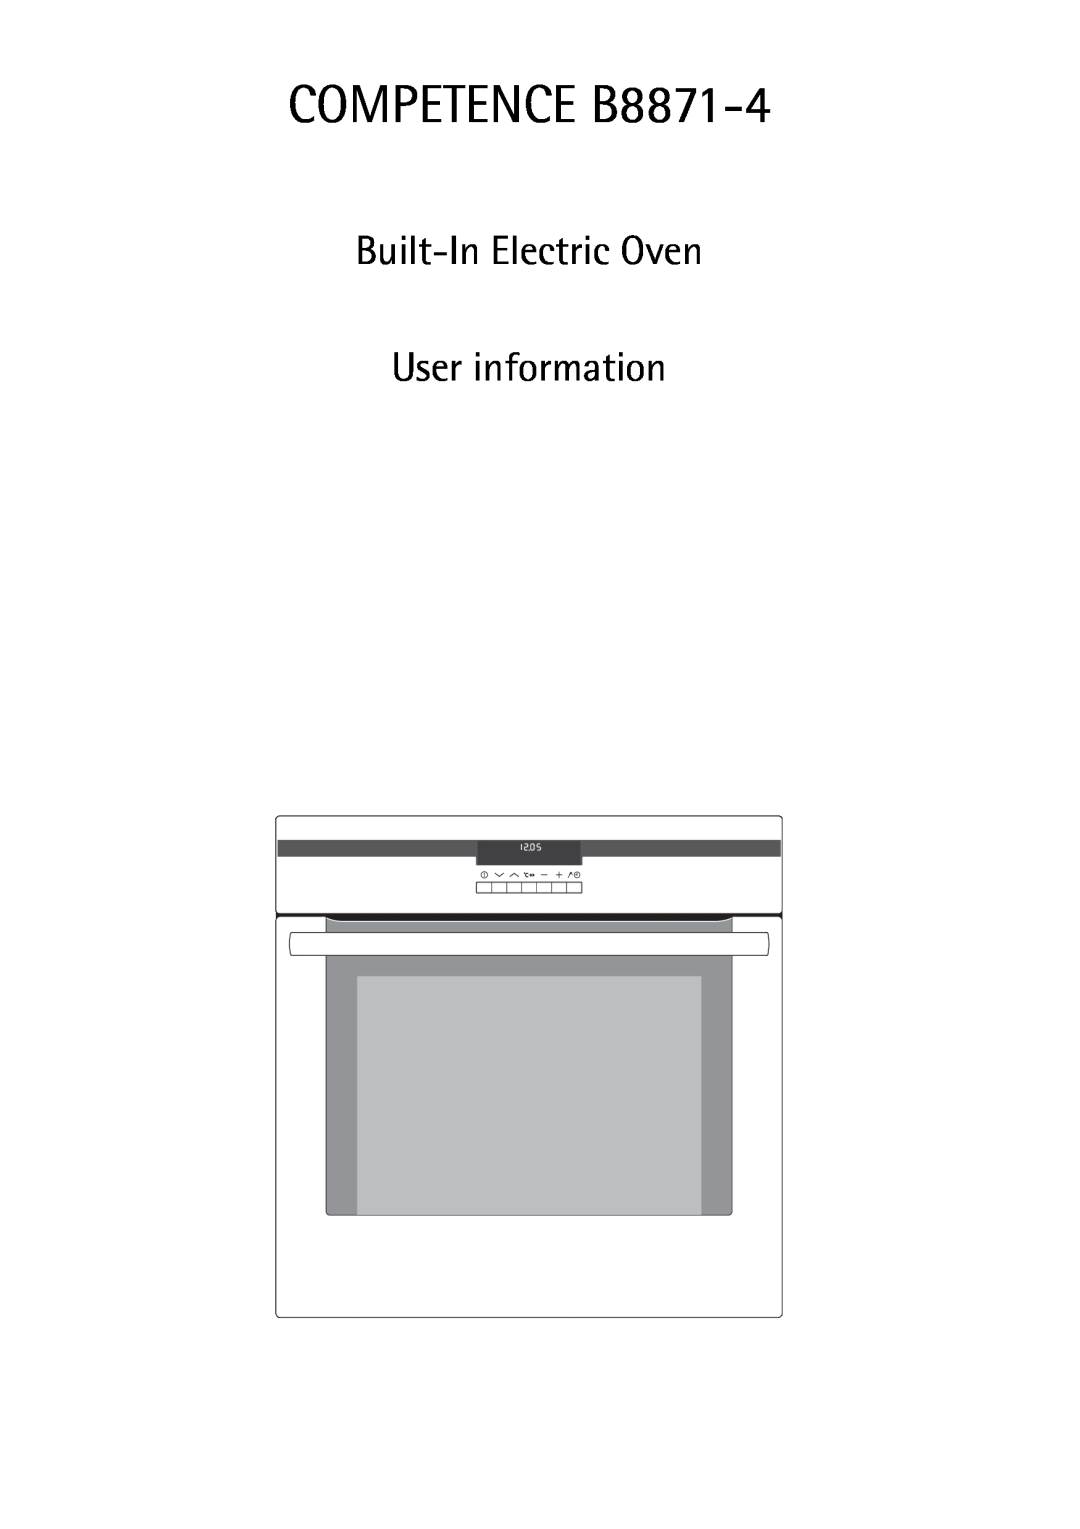 Electrolux manual COMPETENCE B8871-4, Built-In Electric Oven User information 